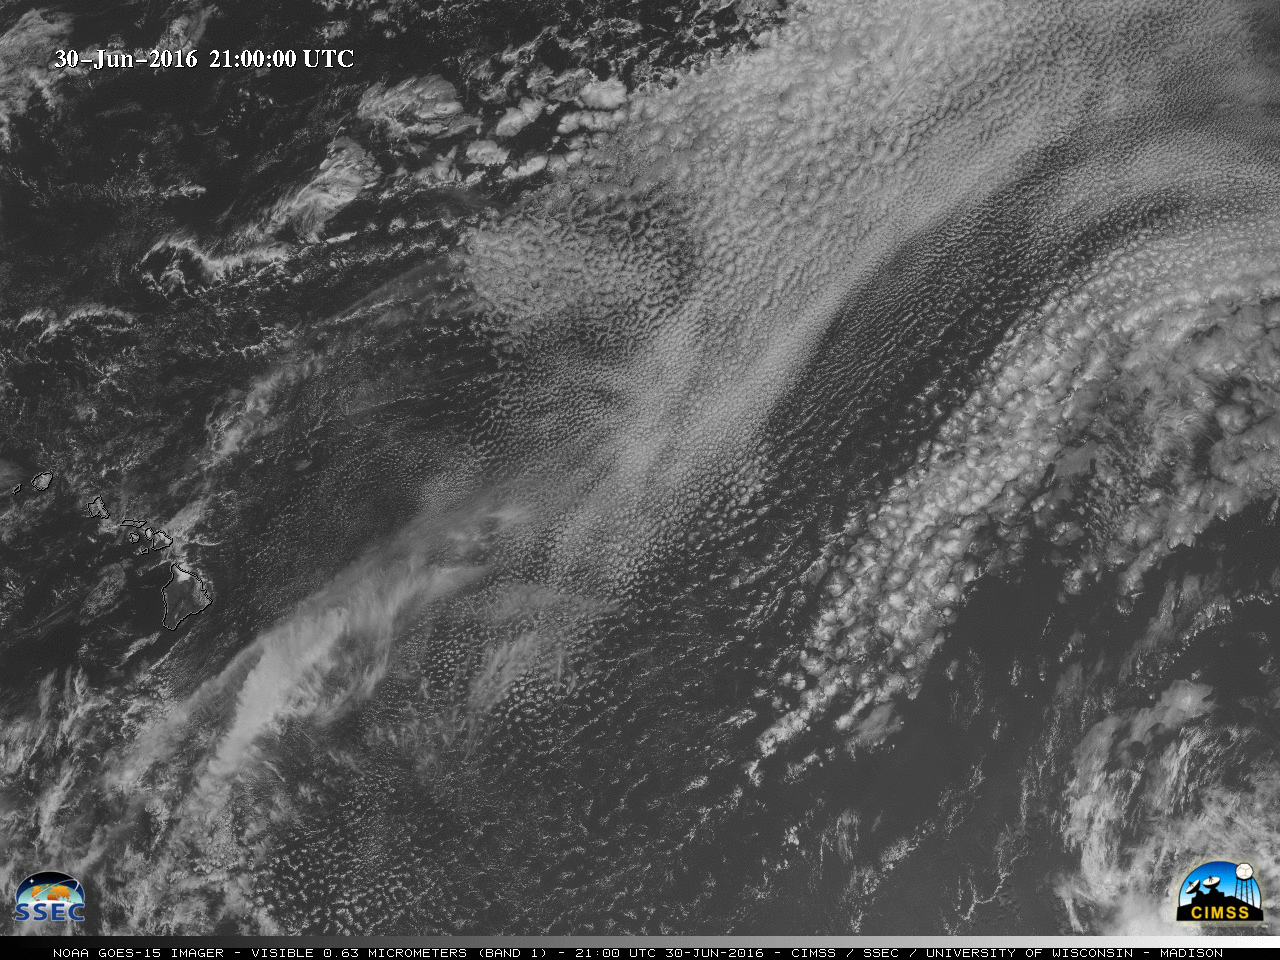 GOES-15 Visible (0.63 µm) images [click to play animation]